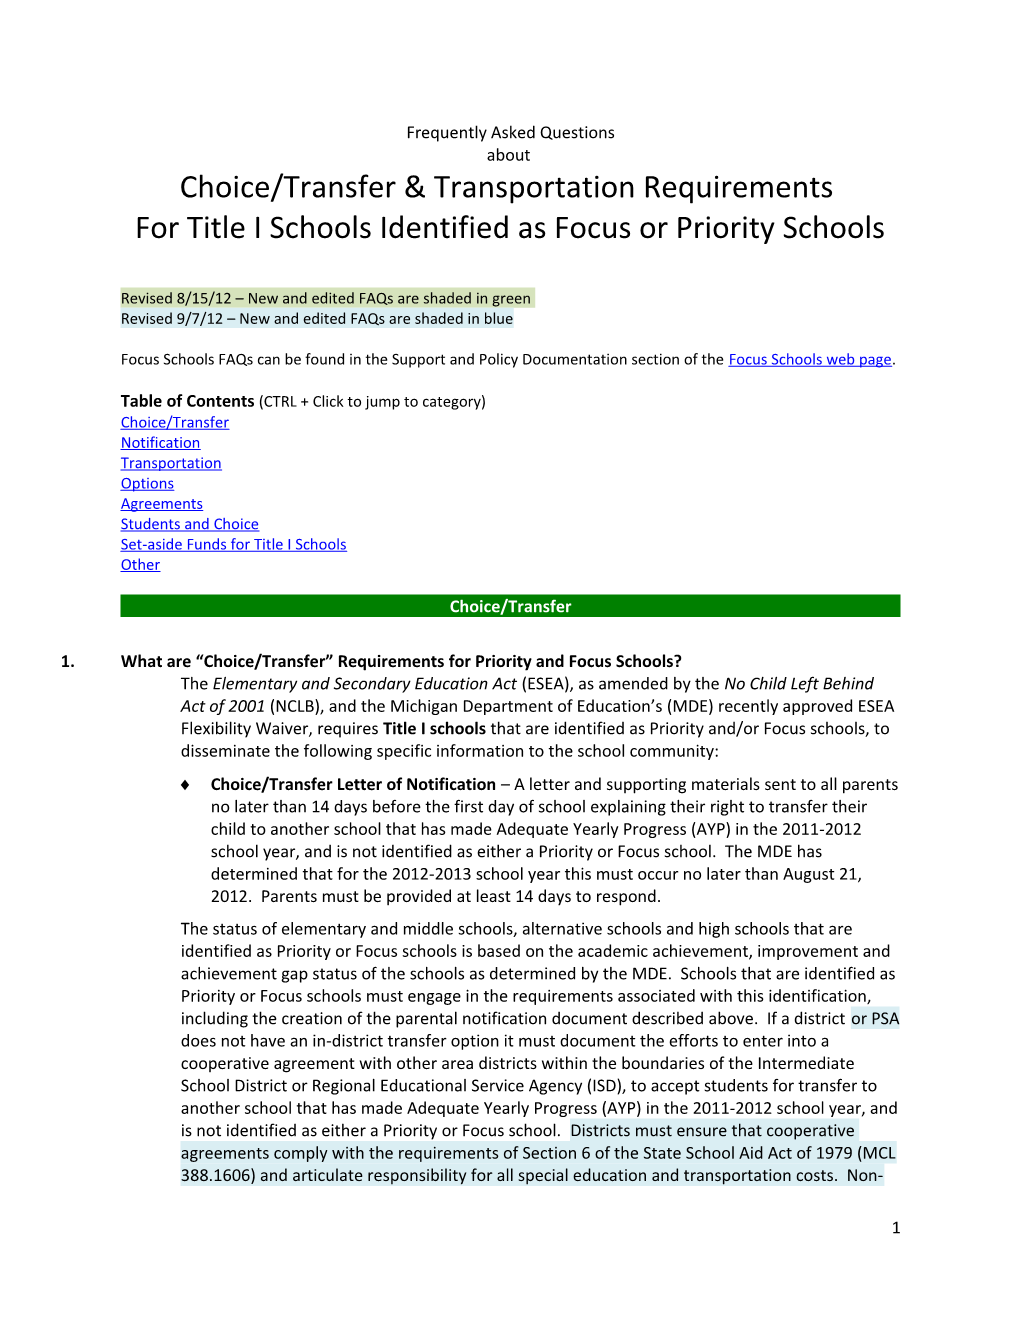 Choice/Transfer & Transportation Requirements